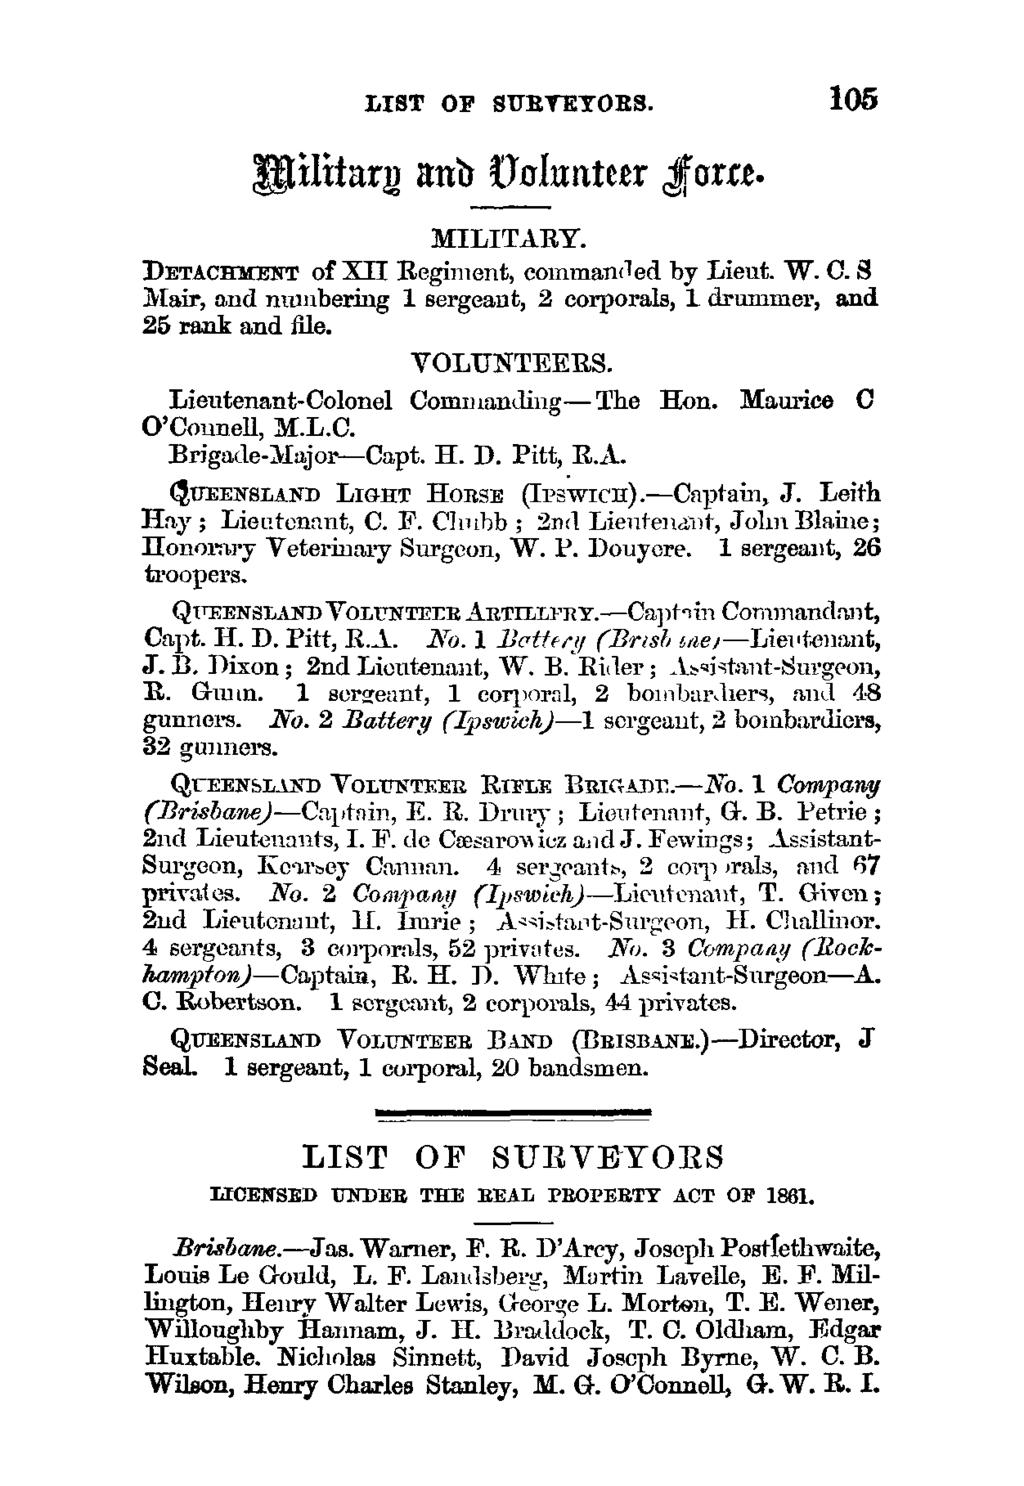 LIST OF SURFTYORS. 105 Uzlztarj anb Volunteeri;'oxxe. MILITARY. DETACRYENT of XII Regiment, commanded by Lieut. W. C. S Mair, and numbering 1 sergeant, 2 corporals, 1 drummer, and 25 rank and file.